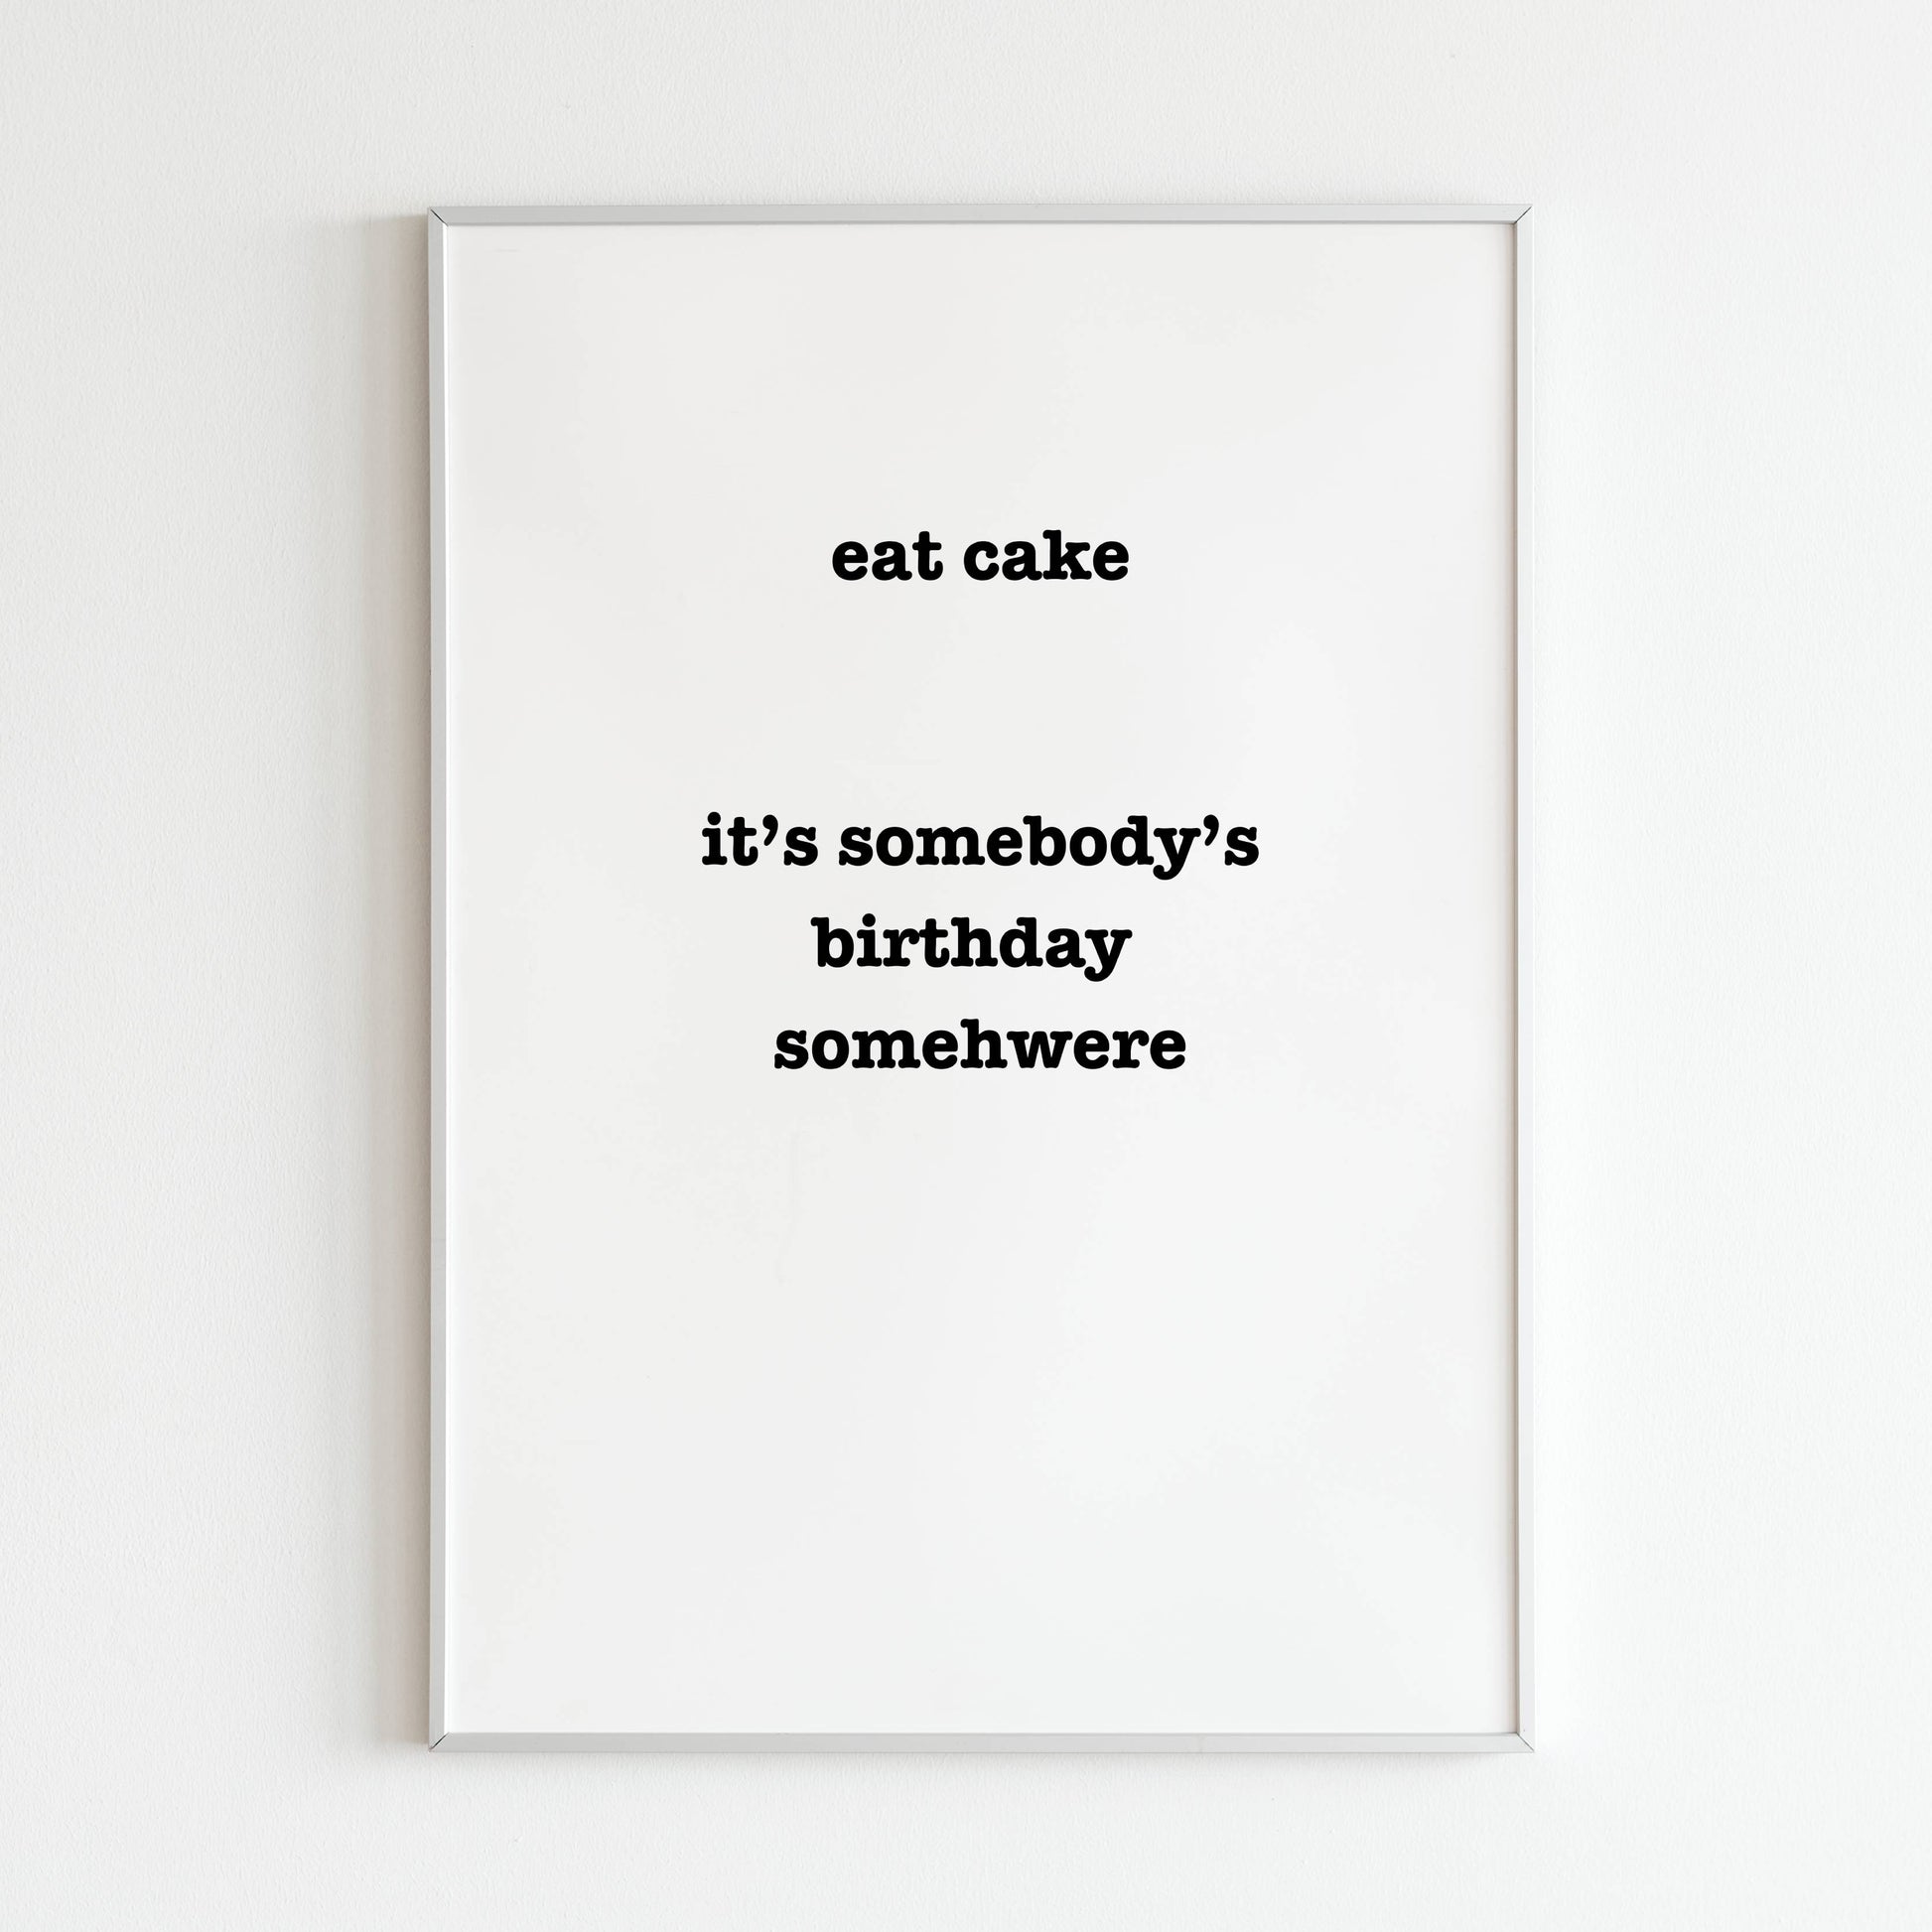 Downloadable "Eat Cake it's somebody birthday somewhere" art print, add a touch of humor while encouraging celebration and joy.